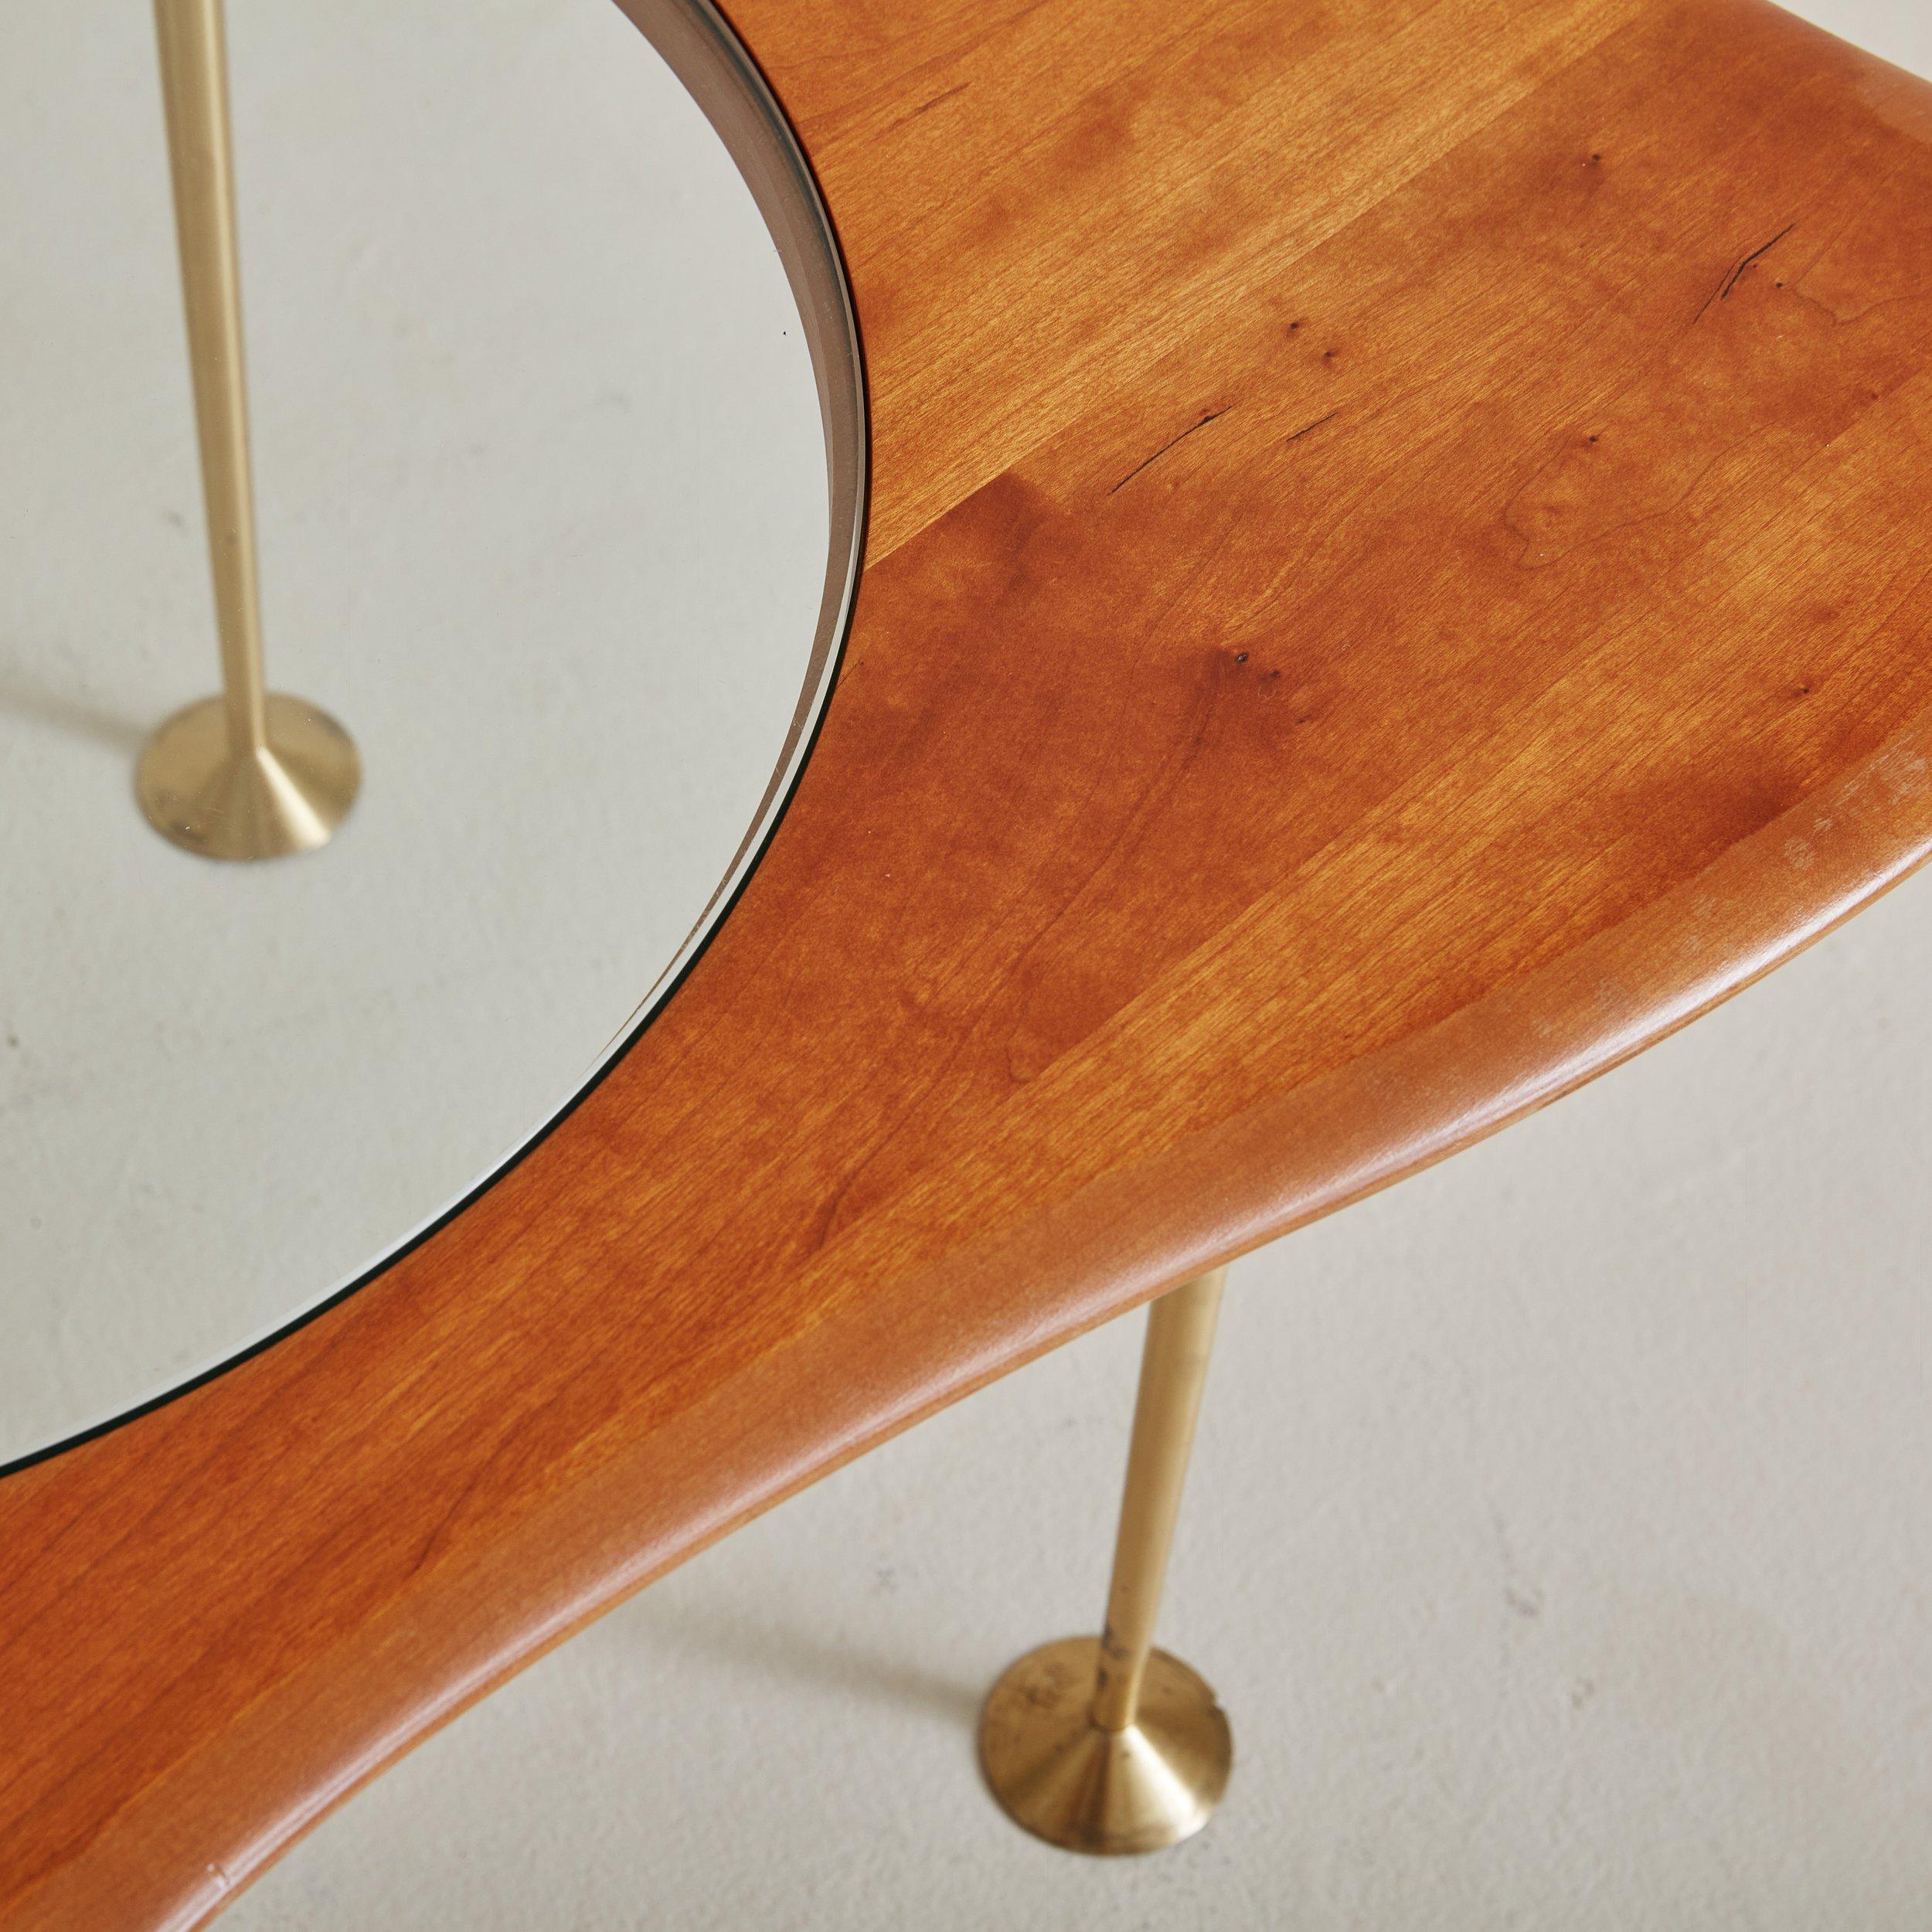 Cherry Wood + Glass Top Coffee Table with Brass Legs, Mid 20th Century In Good Condition For Sale In Chicago, IL